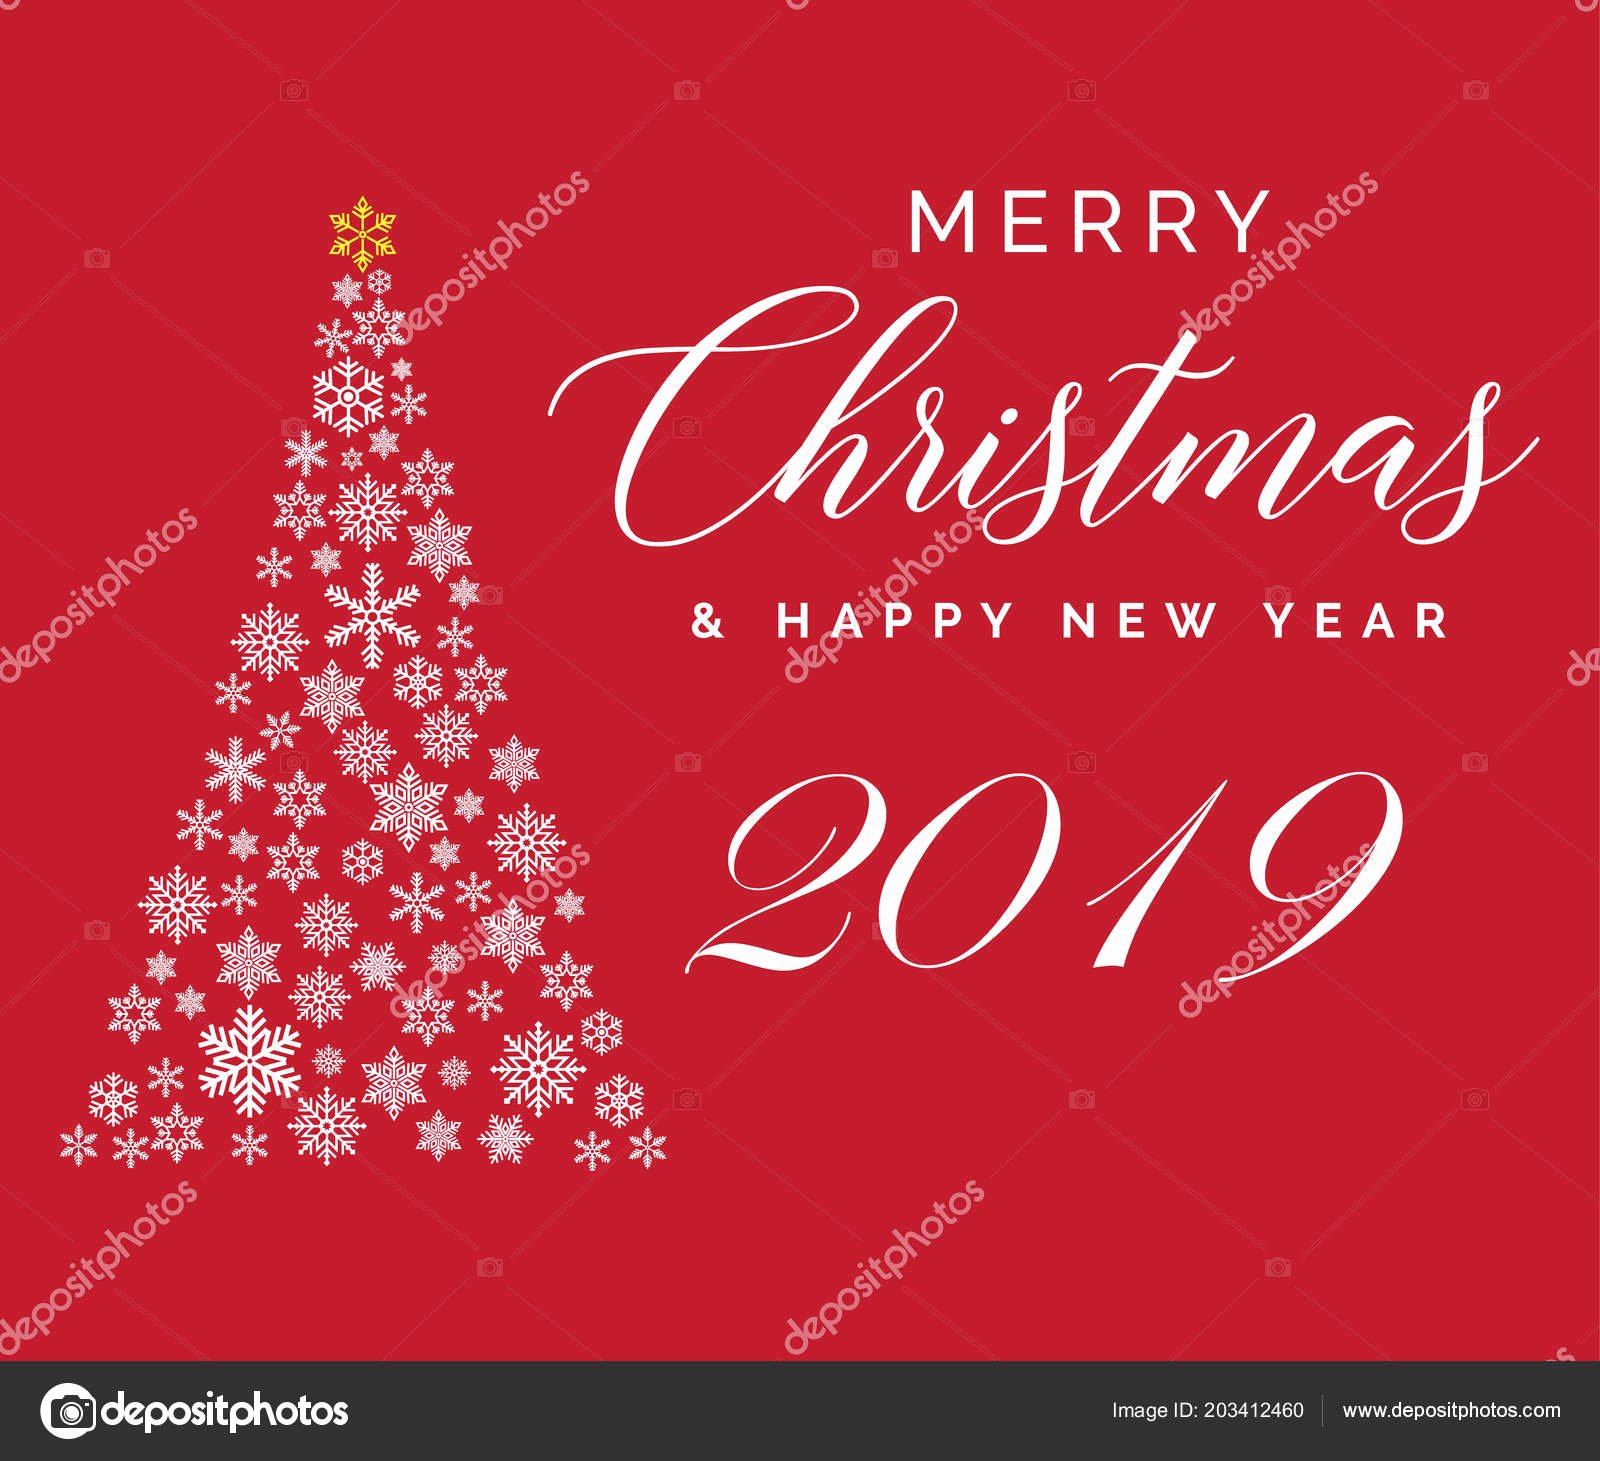 Happy New Year Email Template Luxury Merry Christmas and Happy New Year Email with 2019